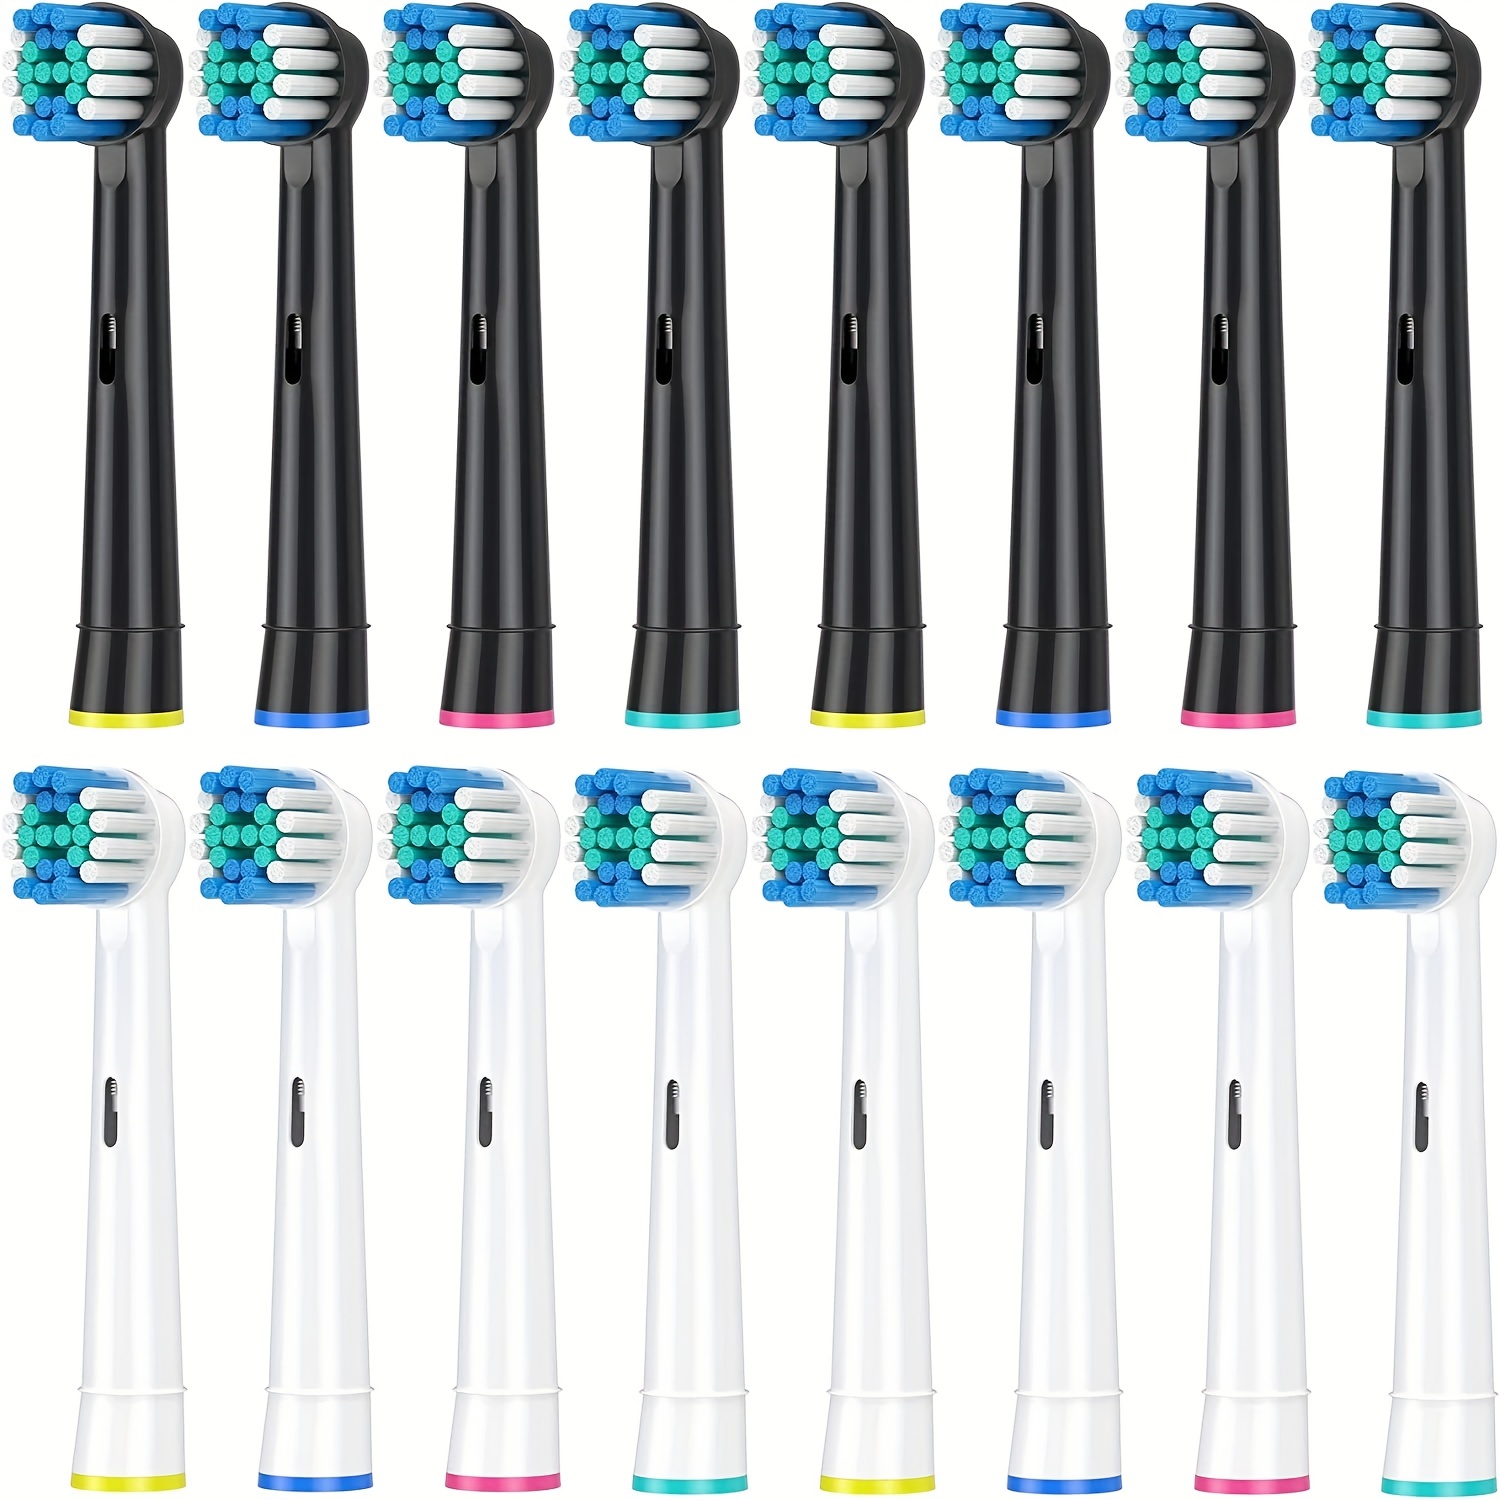 Replacement Toothbrush Heads Compatible with Oral B Braun 4 Pack Professional  Electric Toothbrush Heads for Oral b Pro 1000/500/3000/7000/8000/9600  Toothbrush